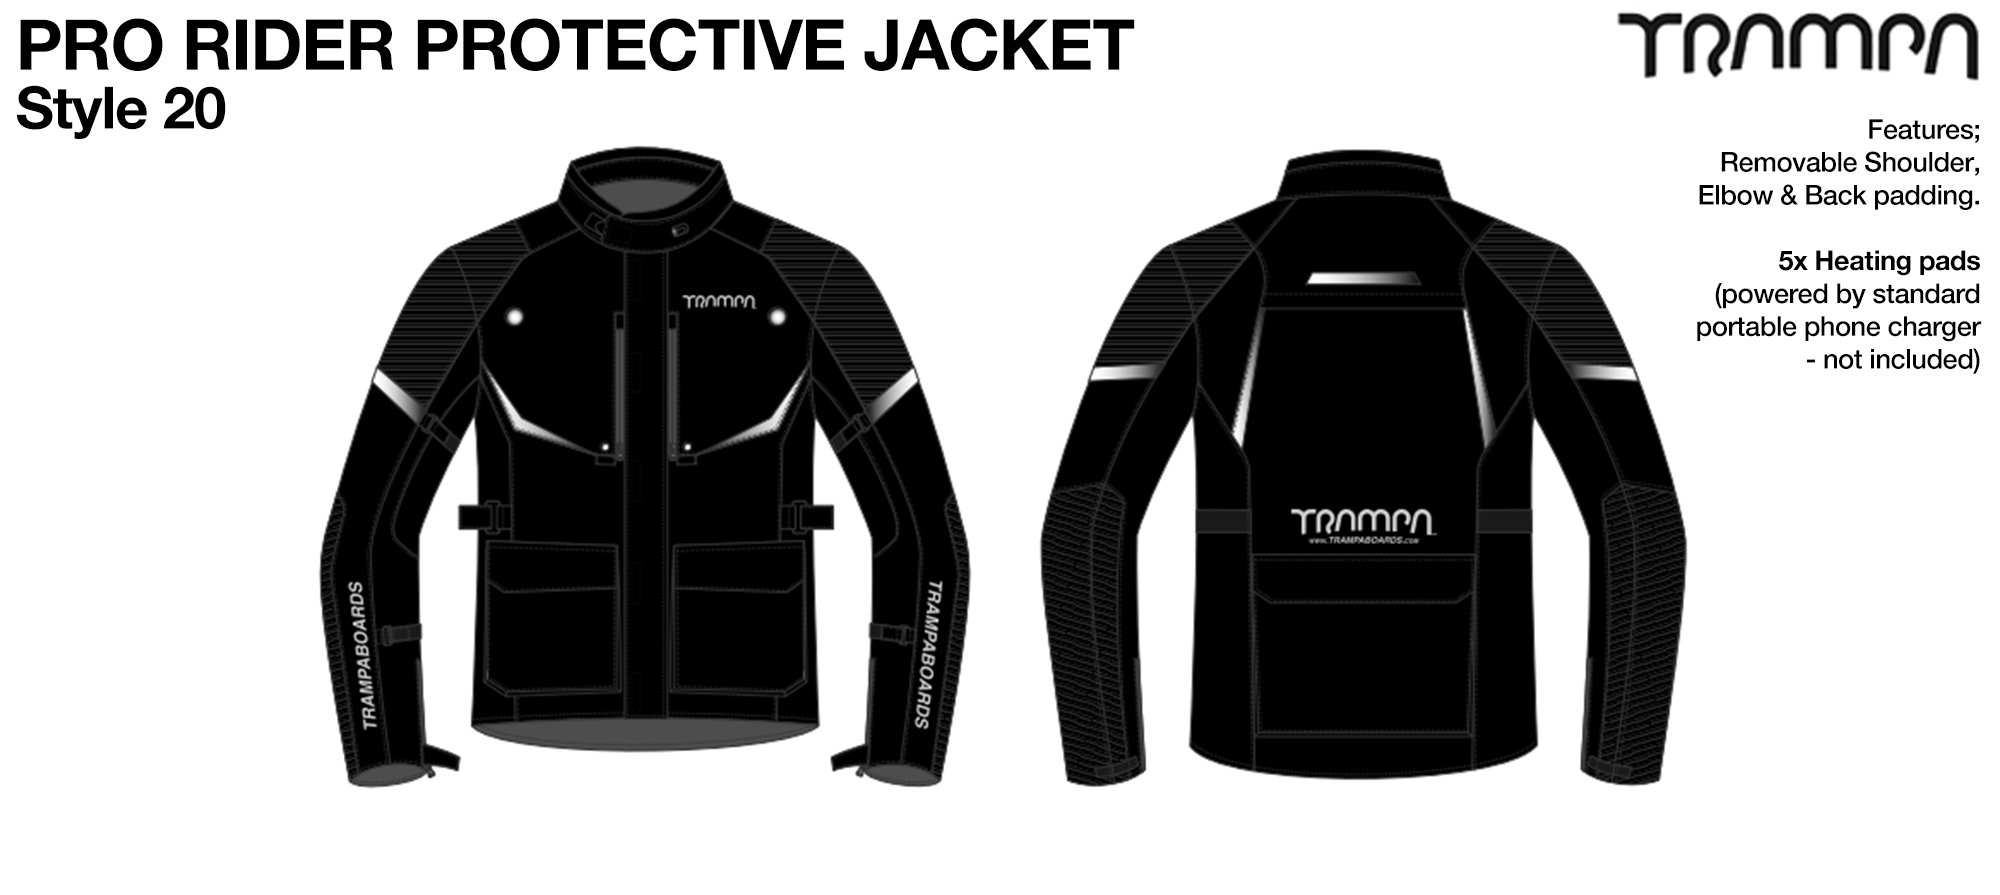 TRAMPA Pro Rider Protective Jacket Style 20